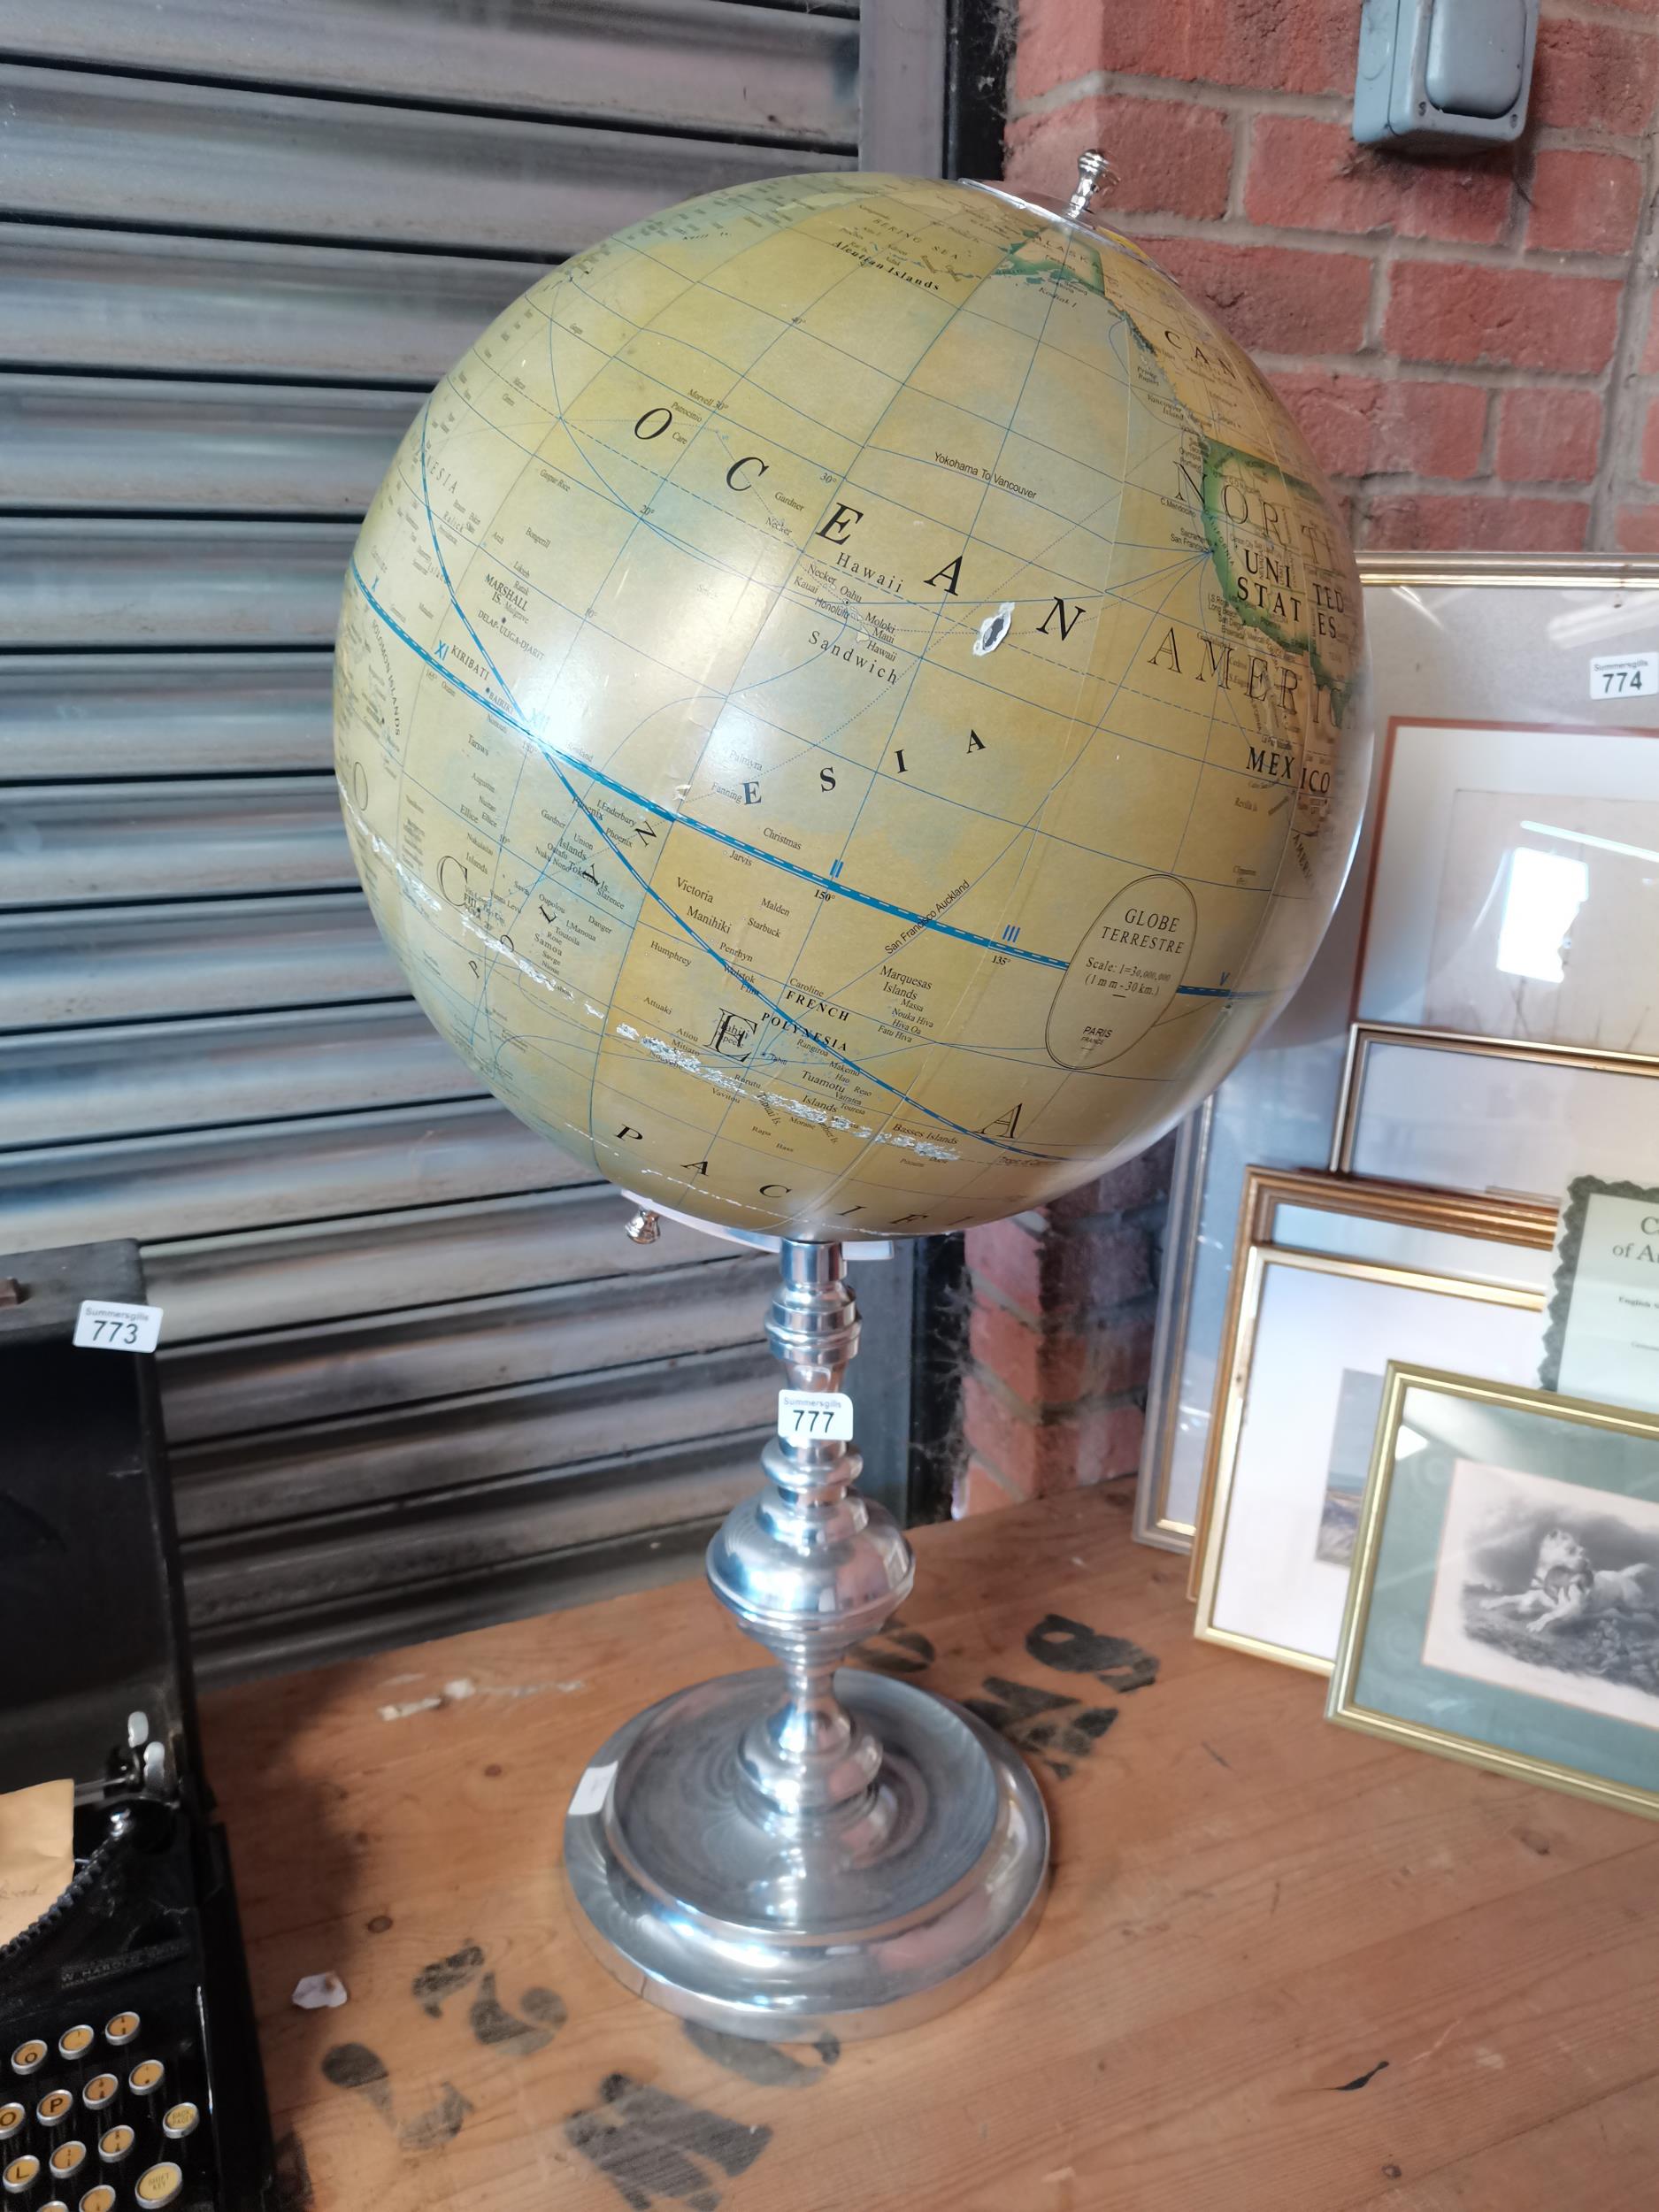 Large Globe with light on a chrome stand